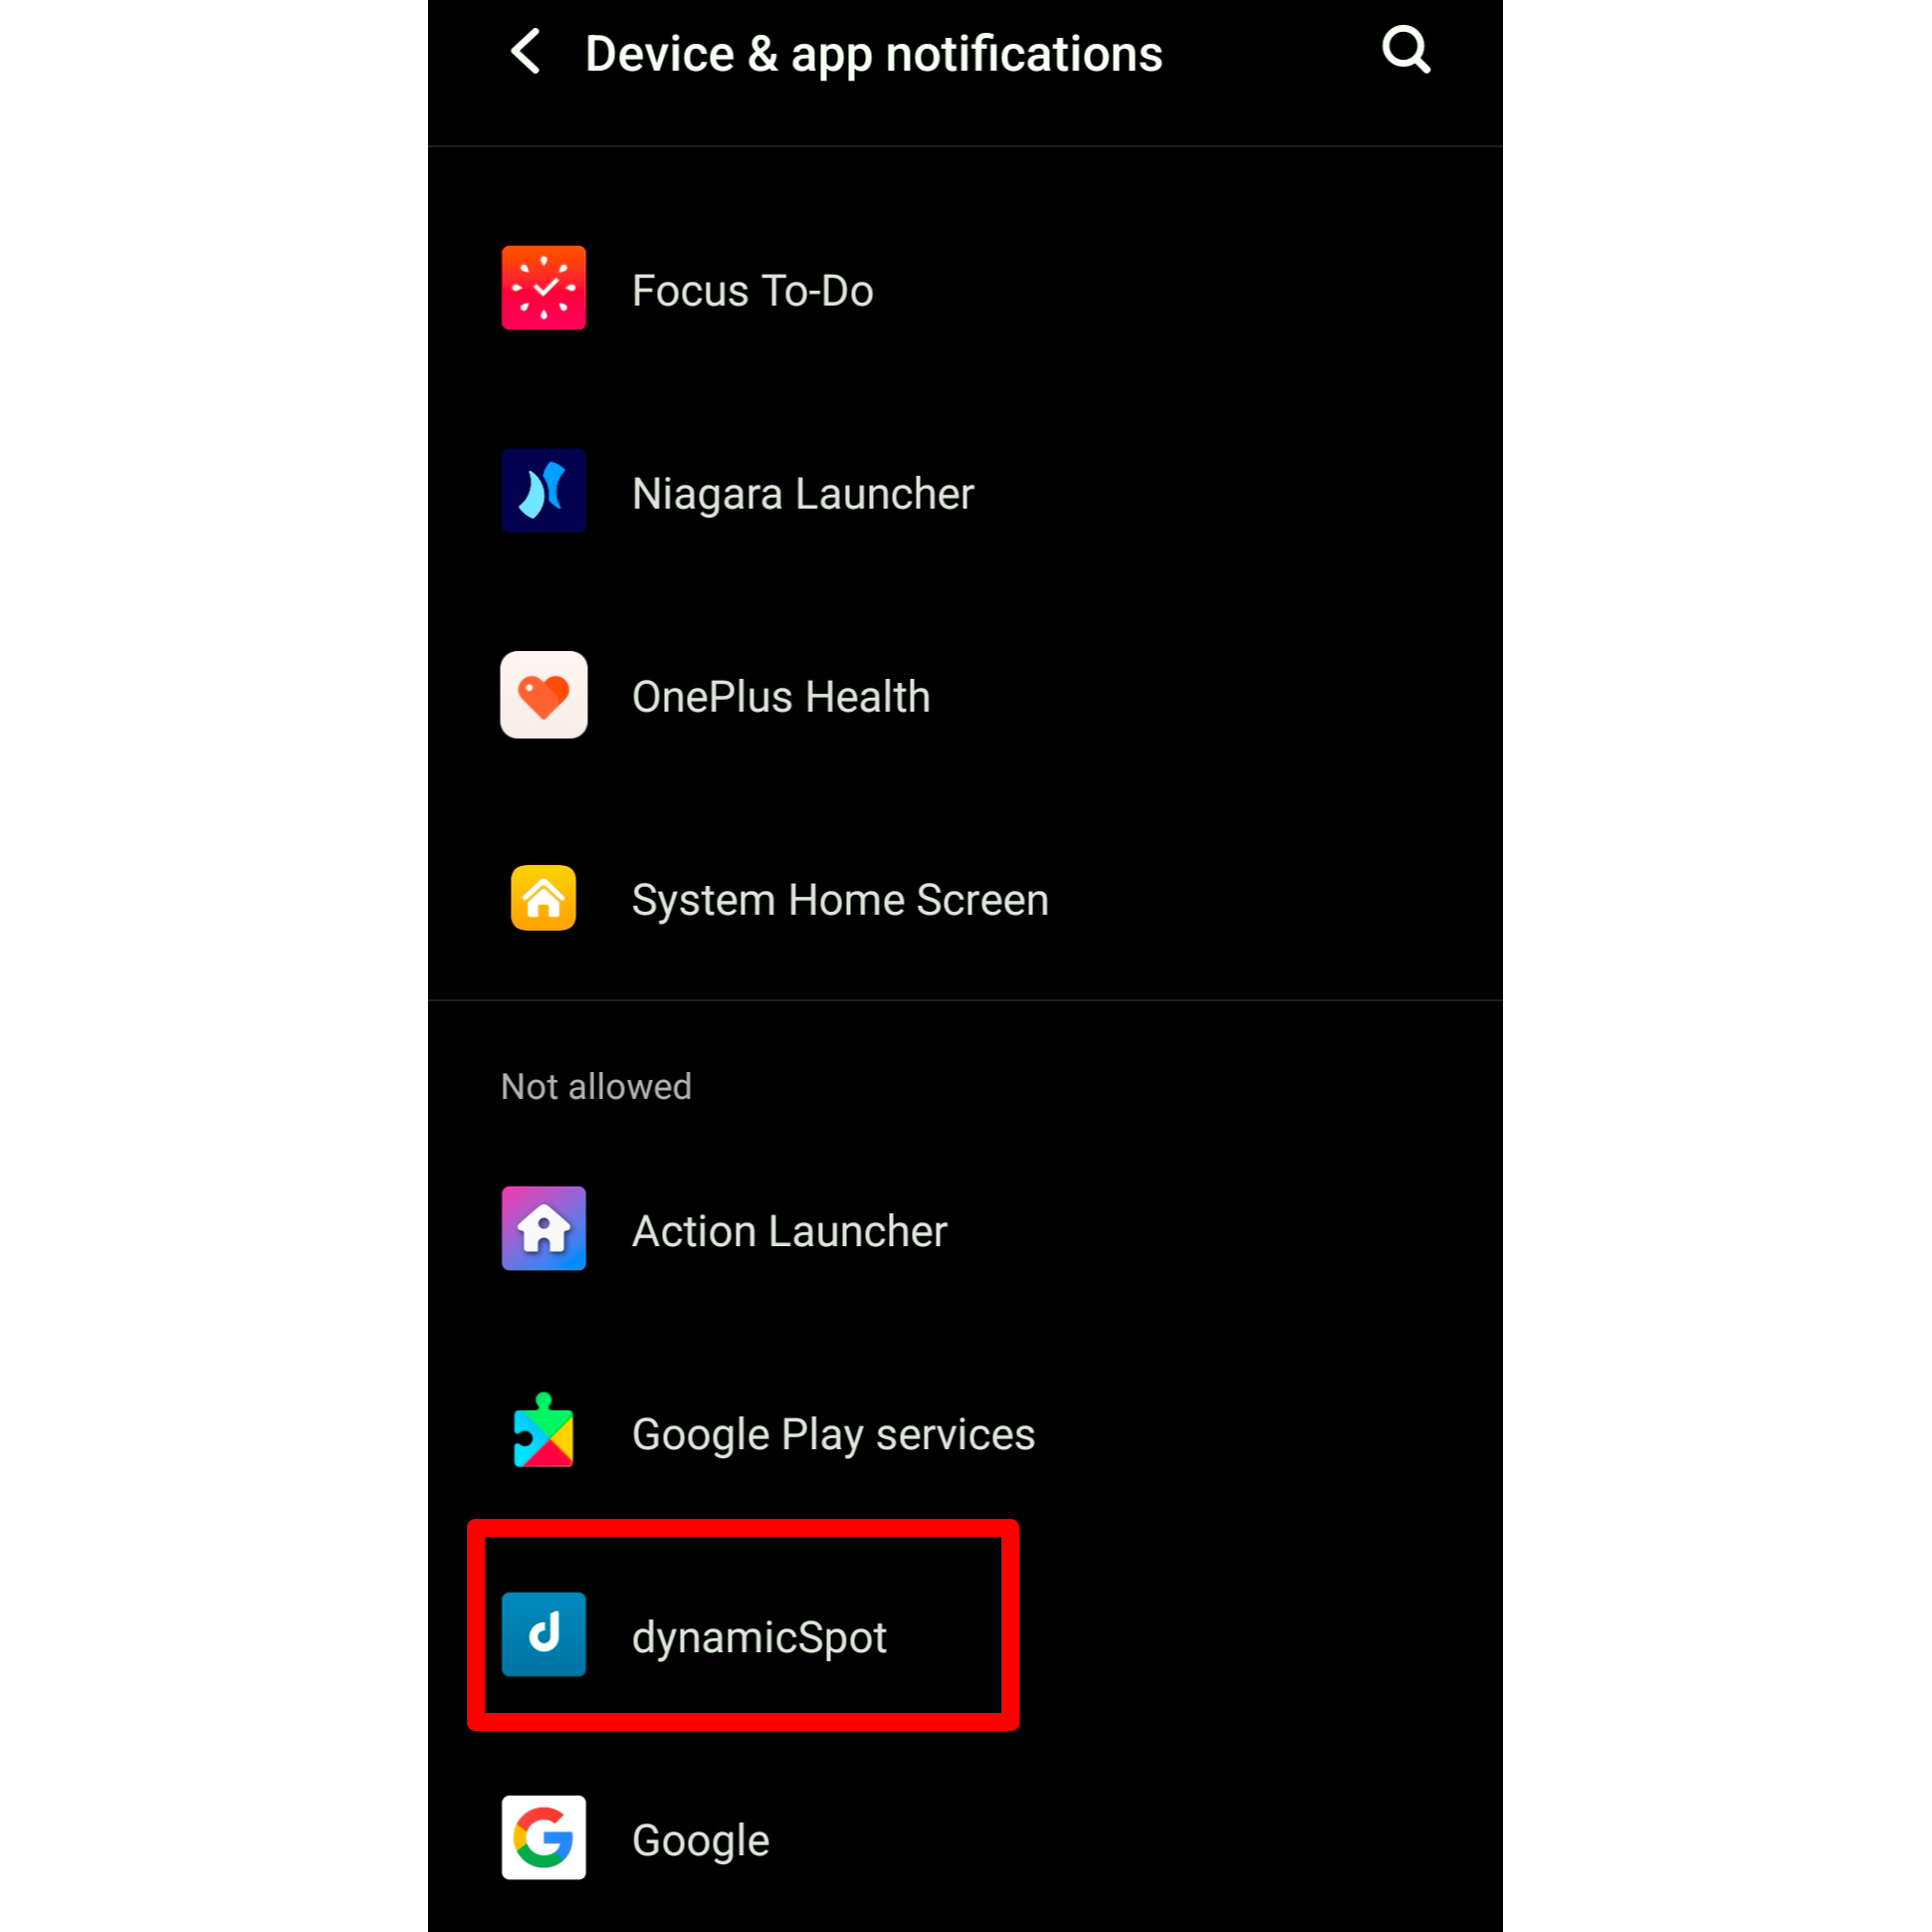 Android's device and app notifications settings menu highlighting the dynamicSpot app.